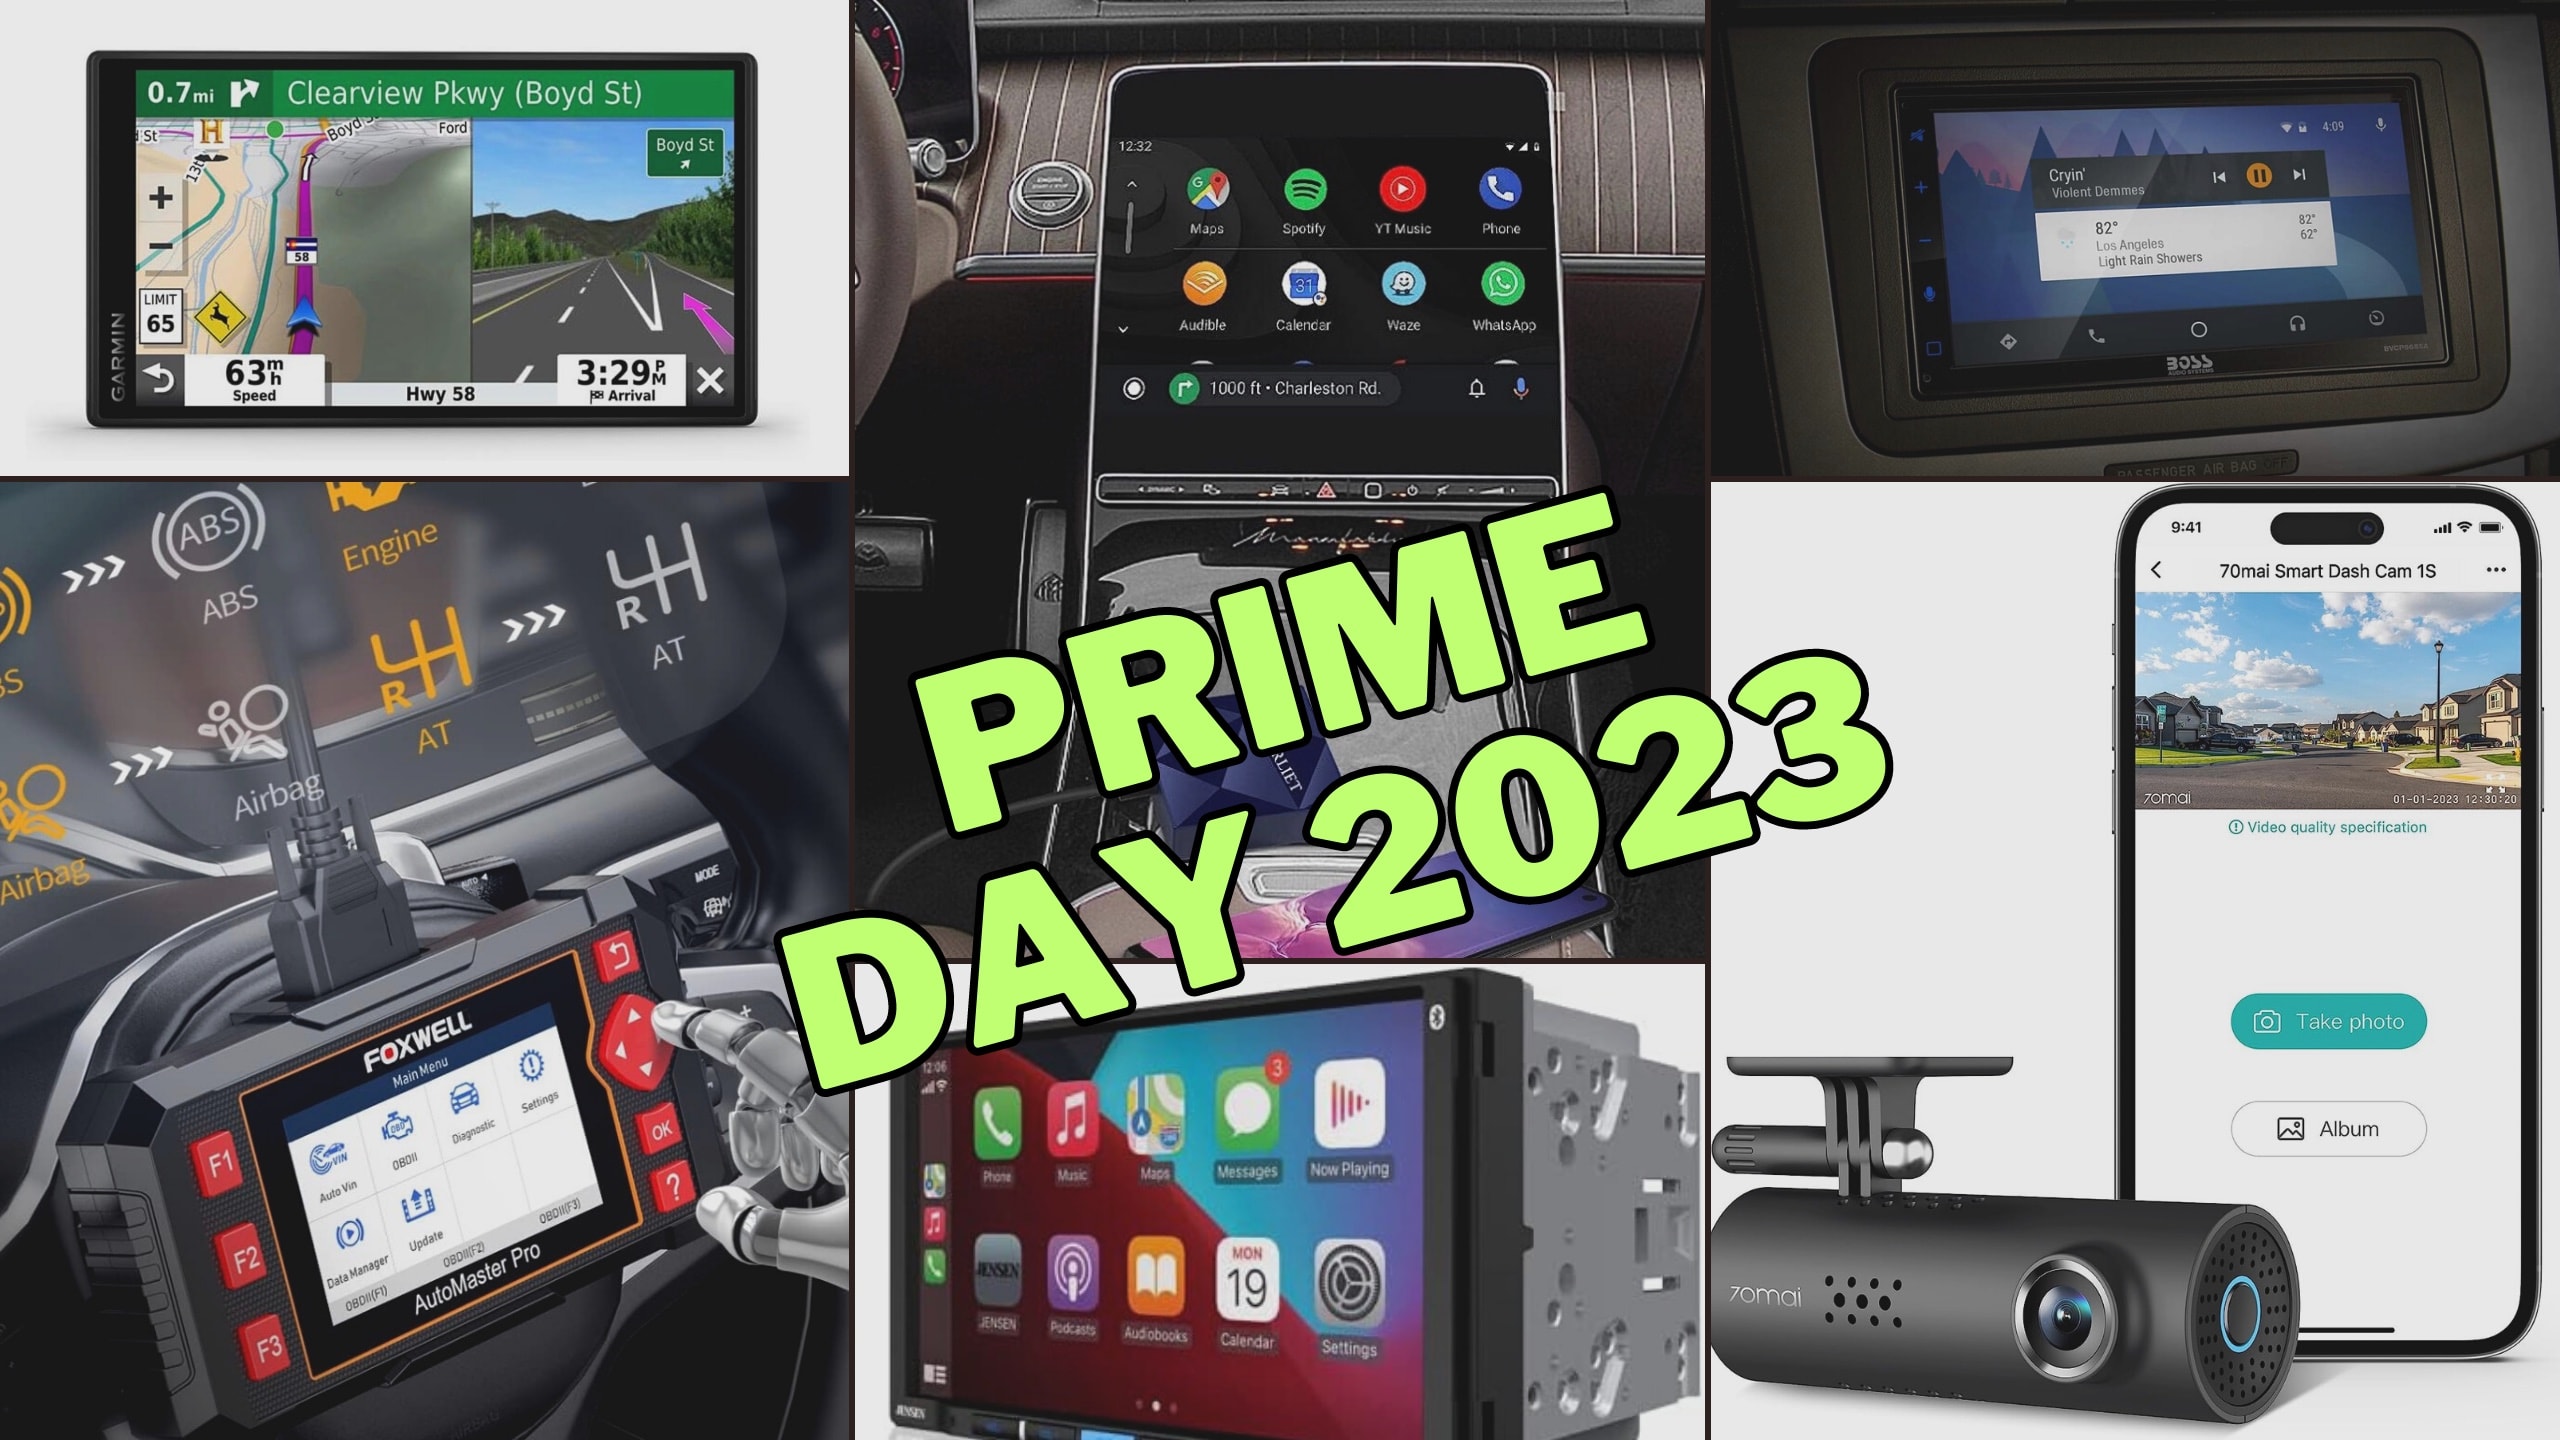 Navigating the  Prime: The Best Prime Day Deals